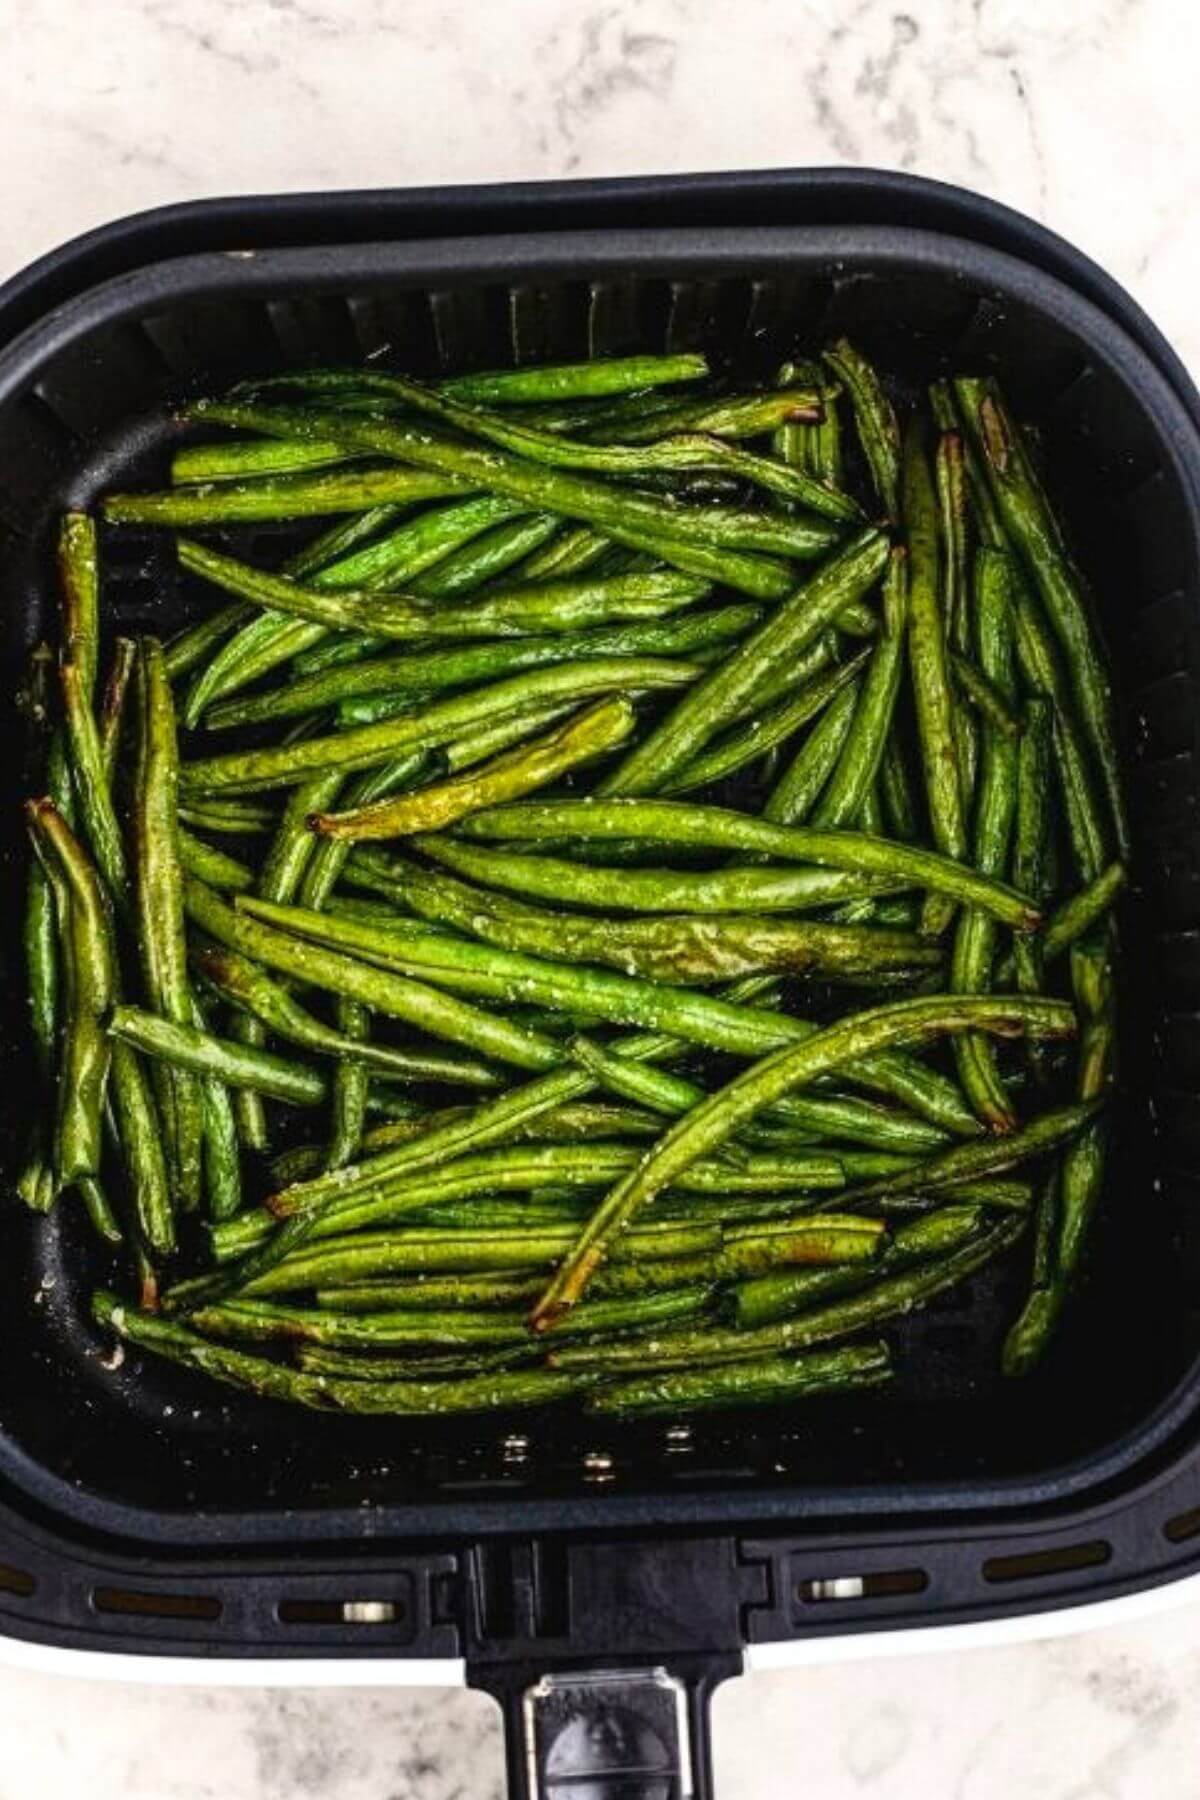 Juicy and crispy cooked green beans in the air fryer basket. 